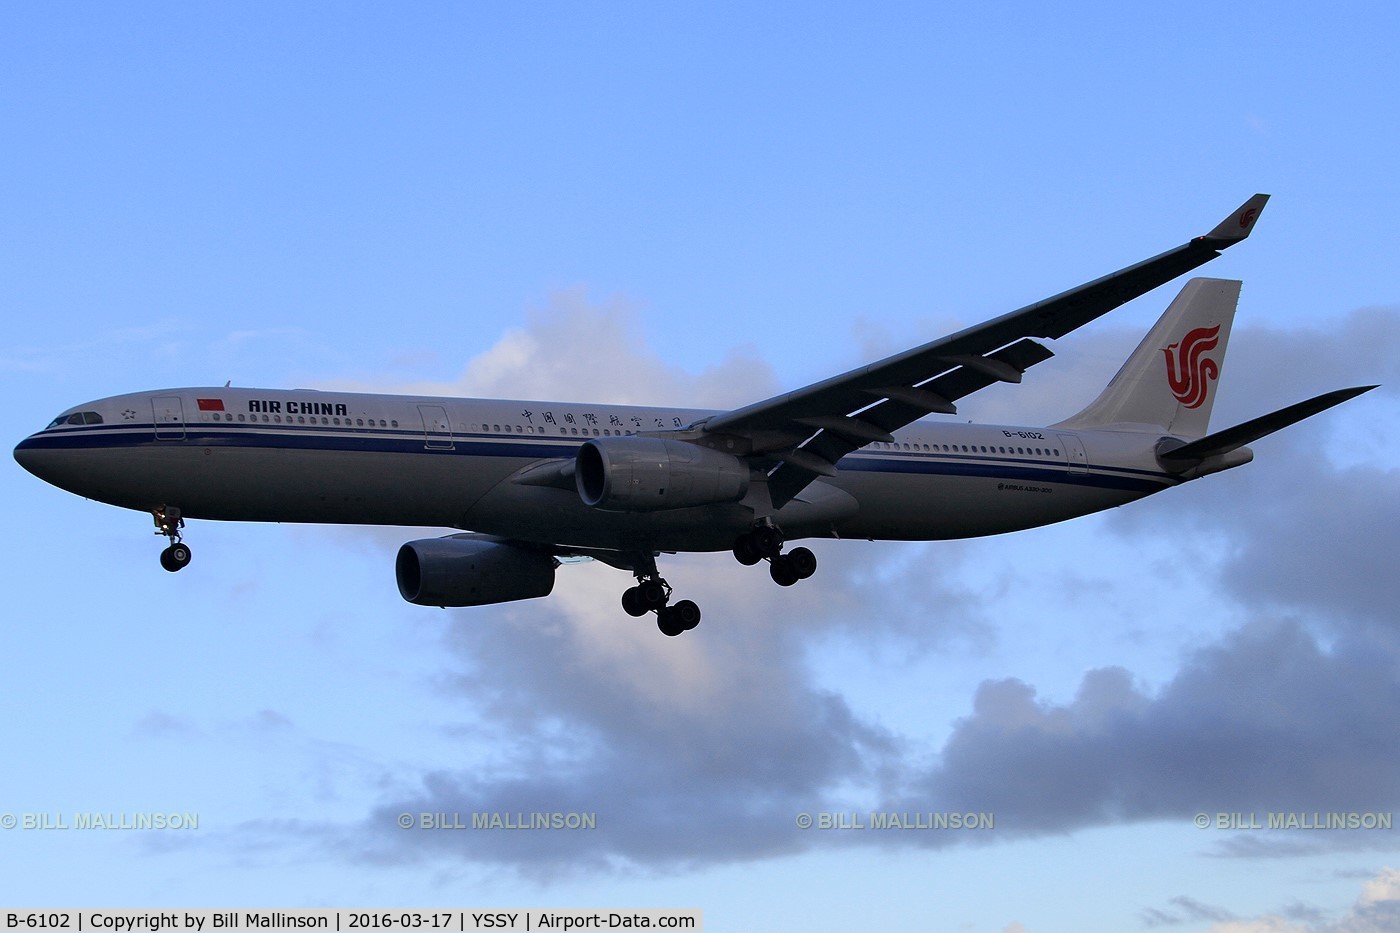 B-6102, 2015 Airbus A330-343 C/N 1695, finals to 16R